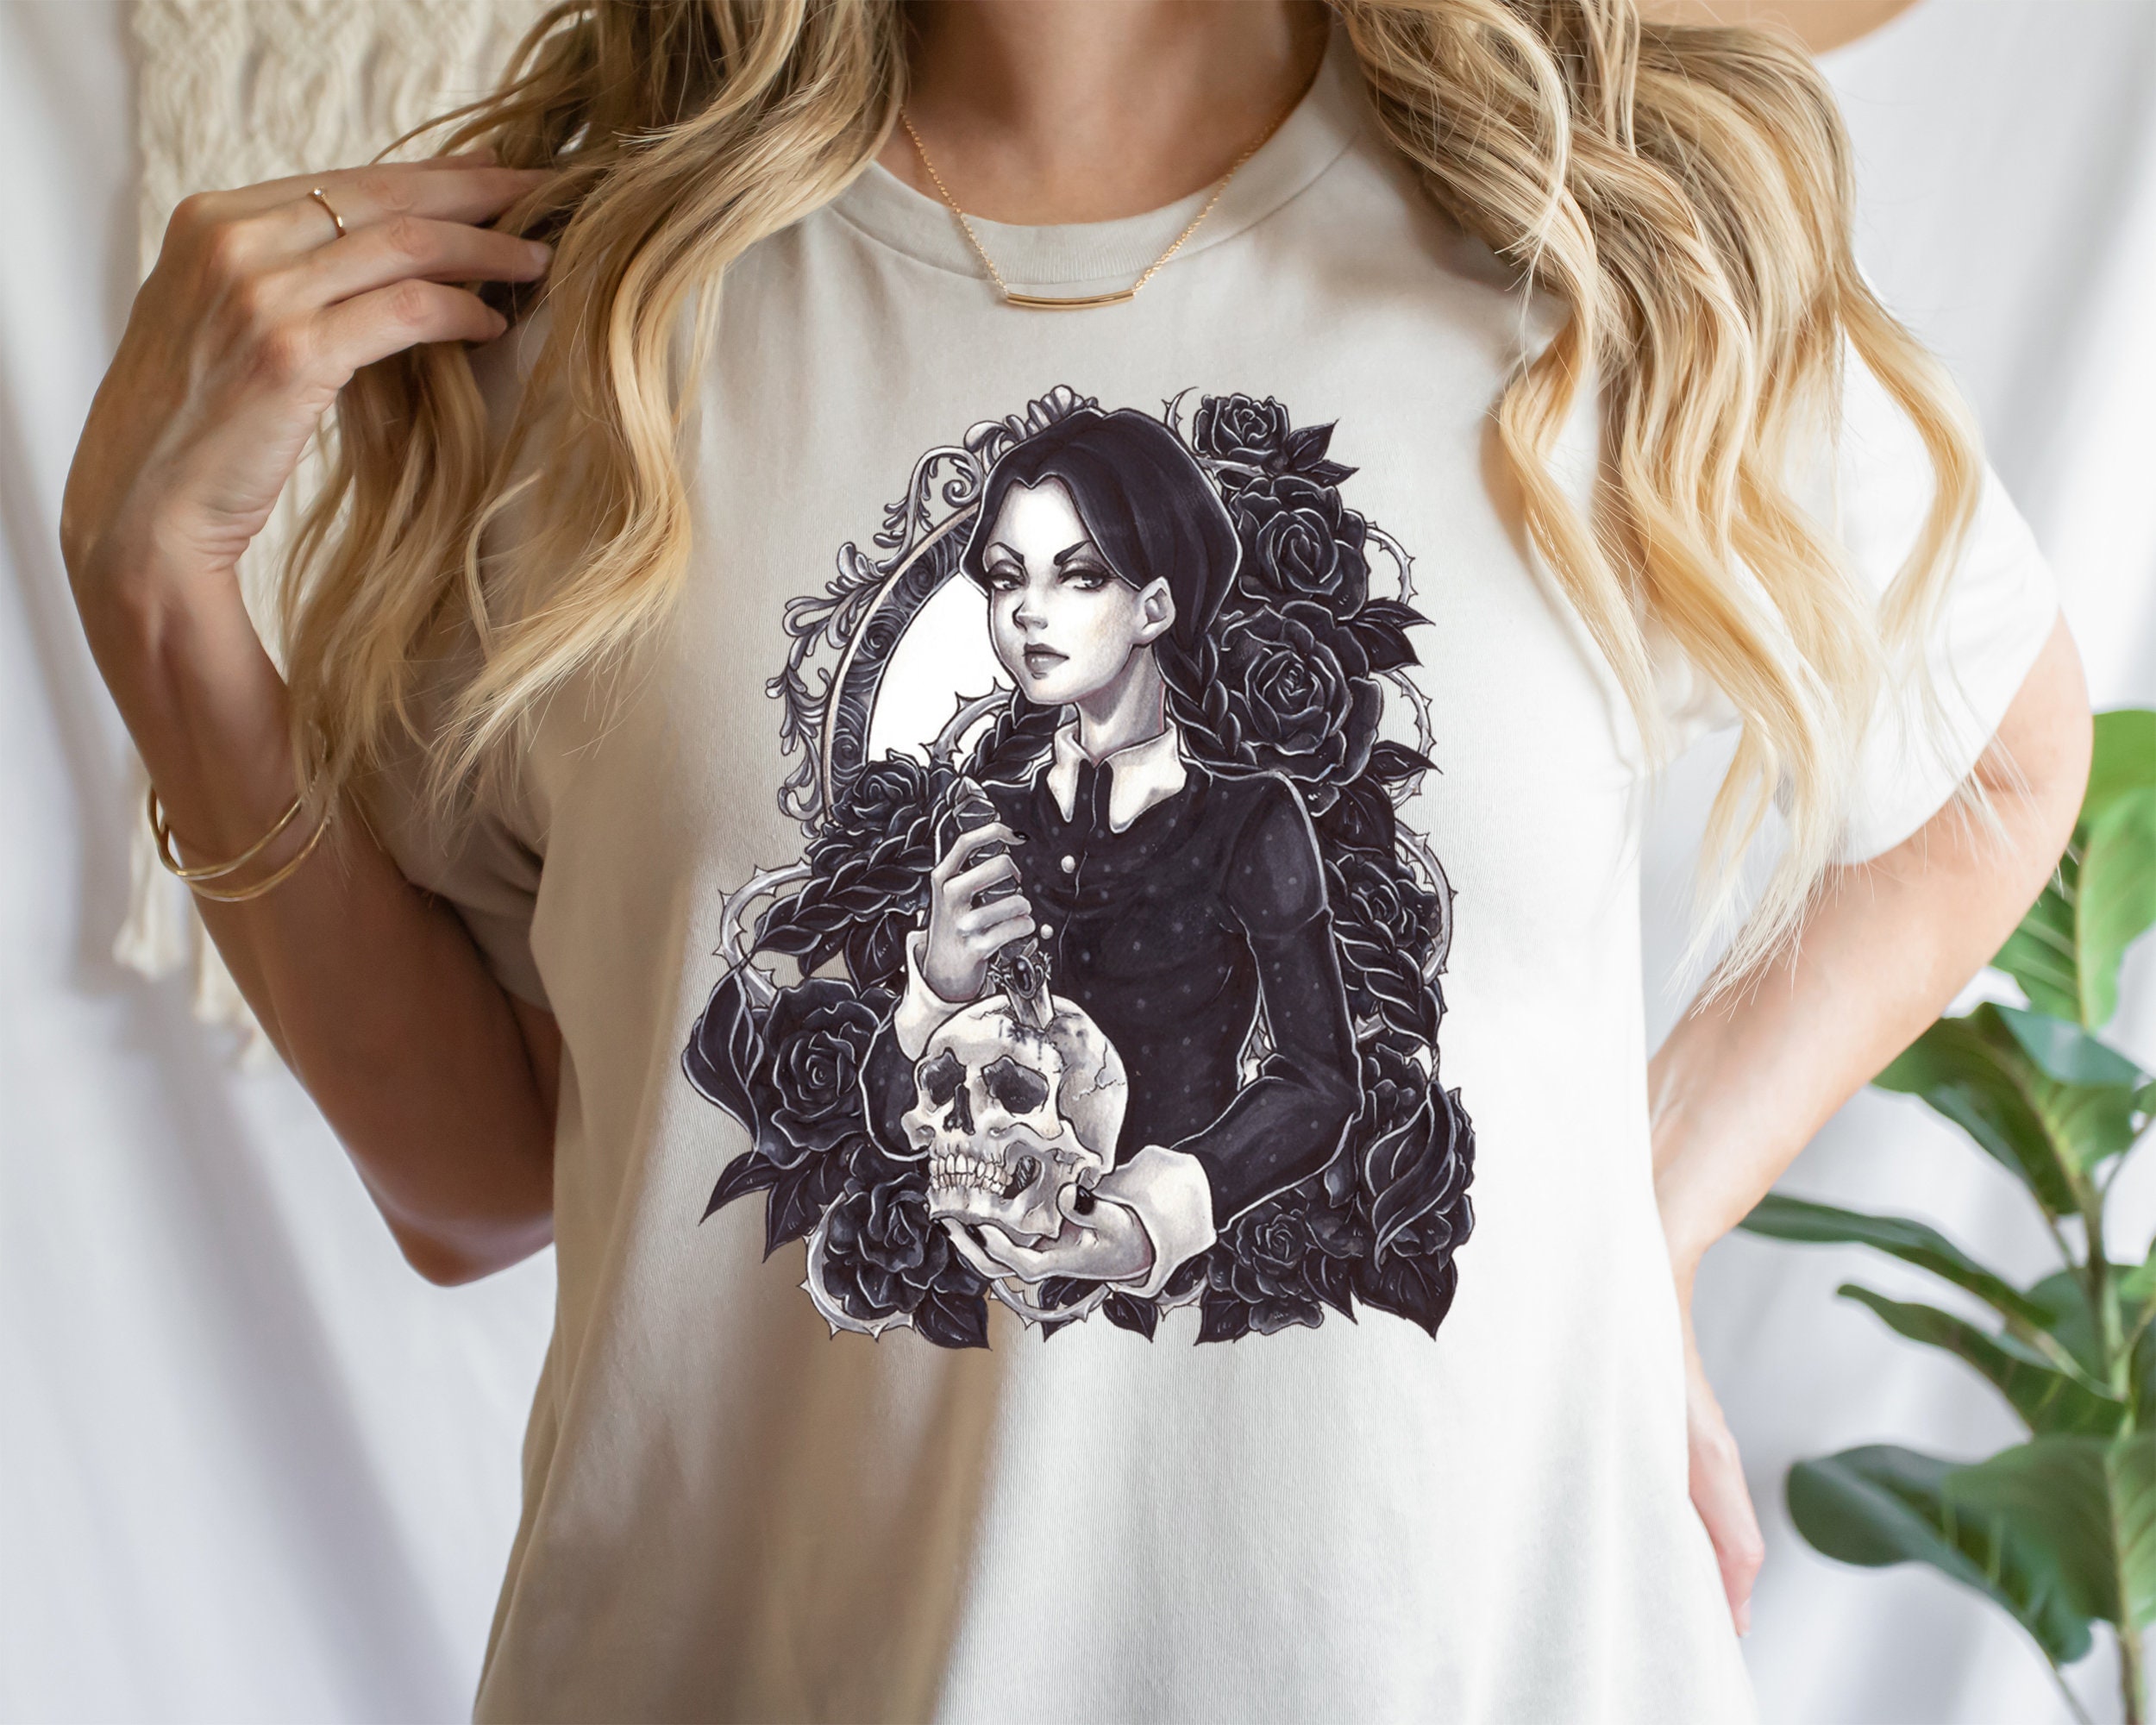 Discover Gothic Wednesday Addams, Funny Halloween Shirt, Addam Family, Creepy Halloween Shirt, Halloween Skull Shirt, Scary Shirt, Spooky Shirts